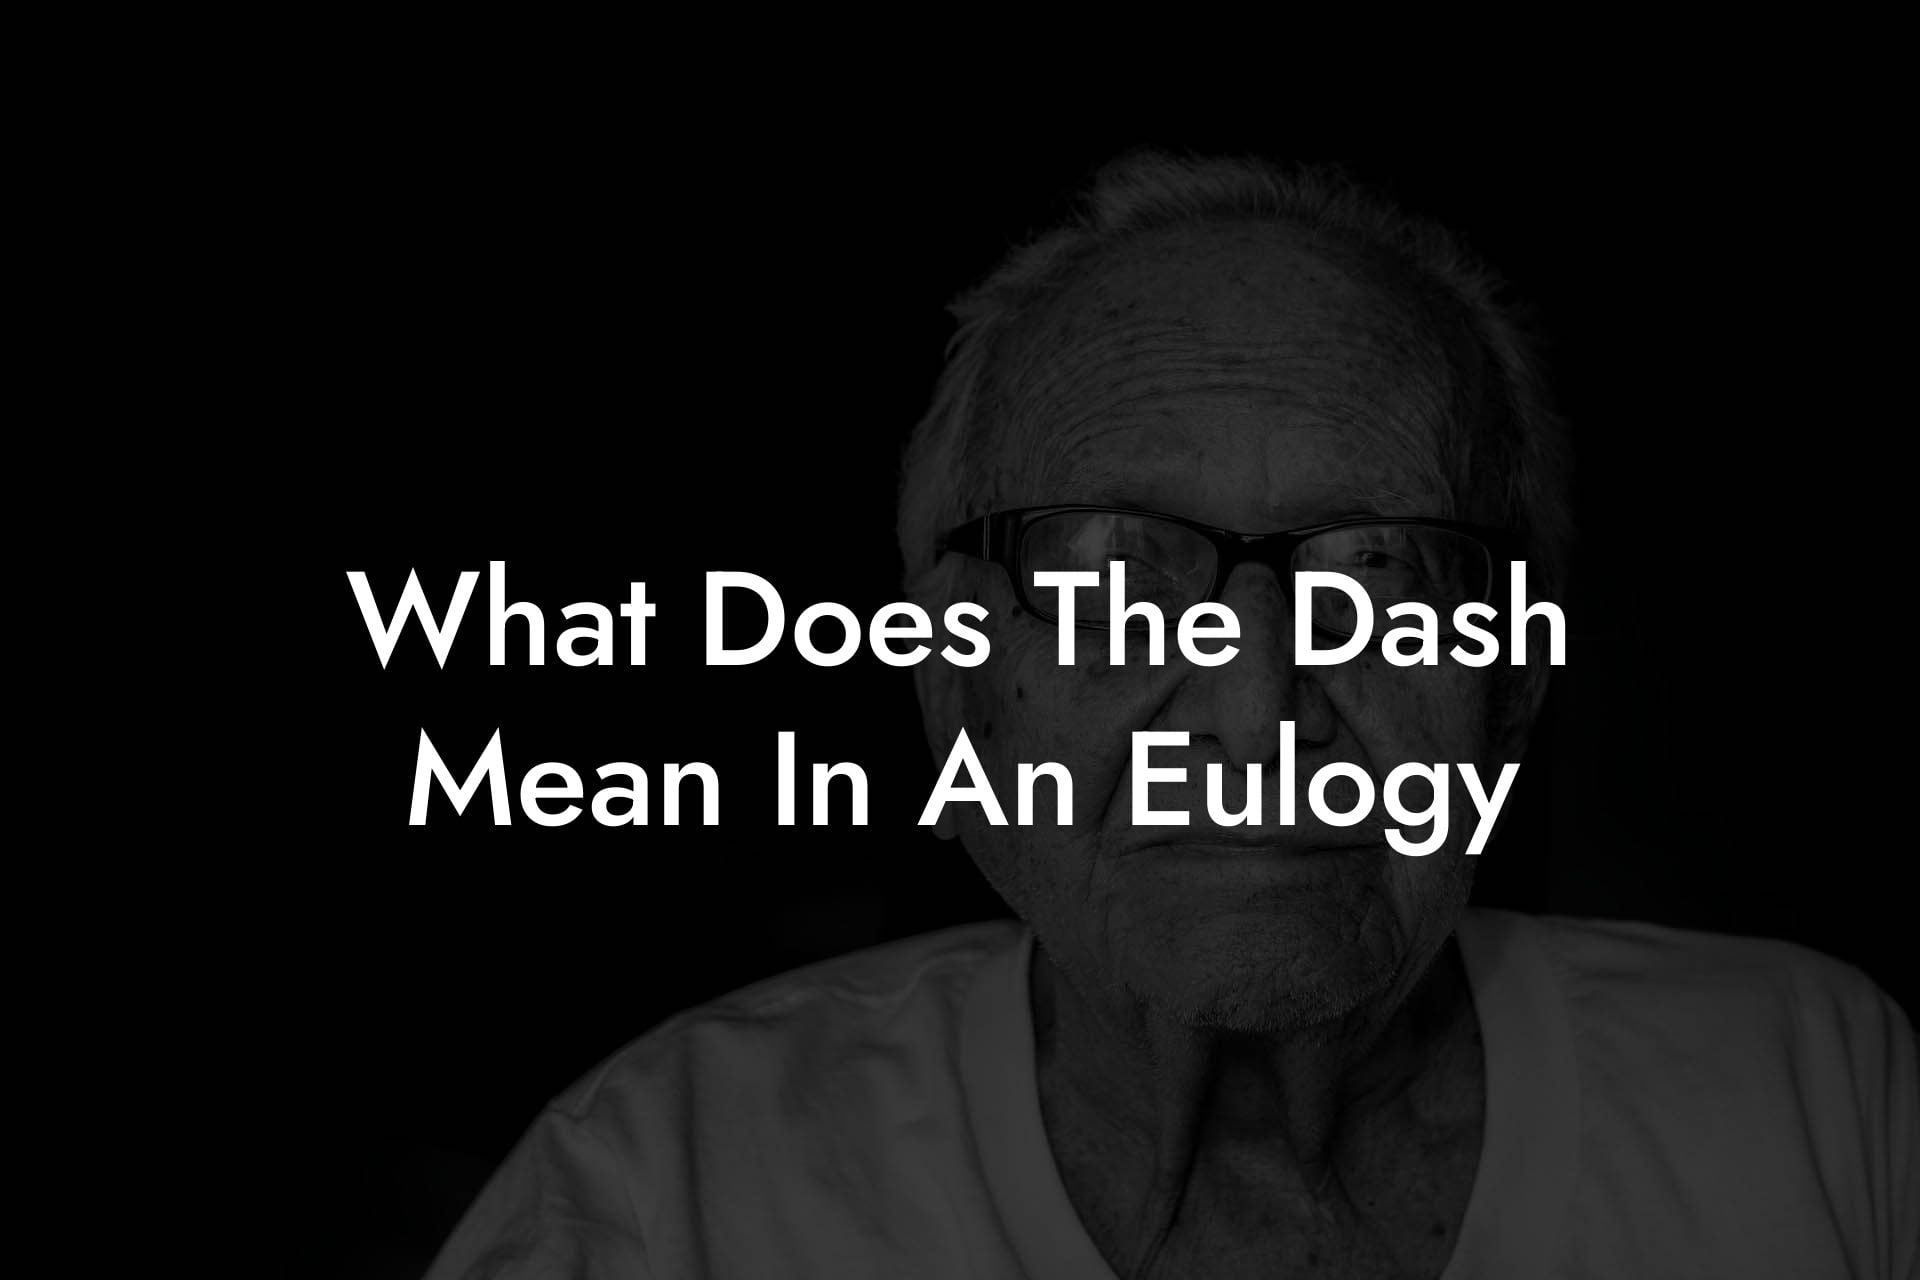 What Does The Dash Mean In An Eulogy